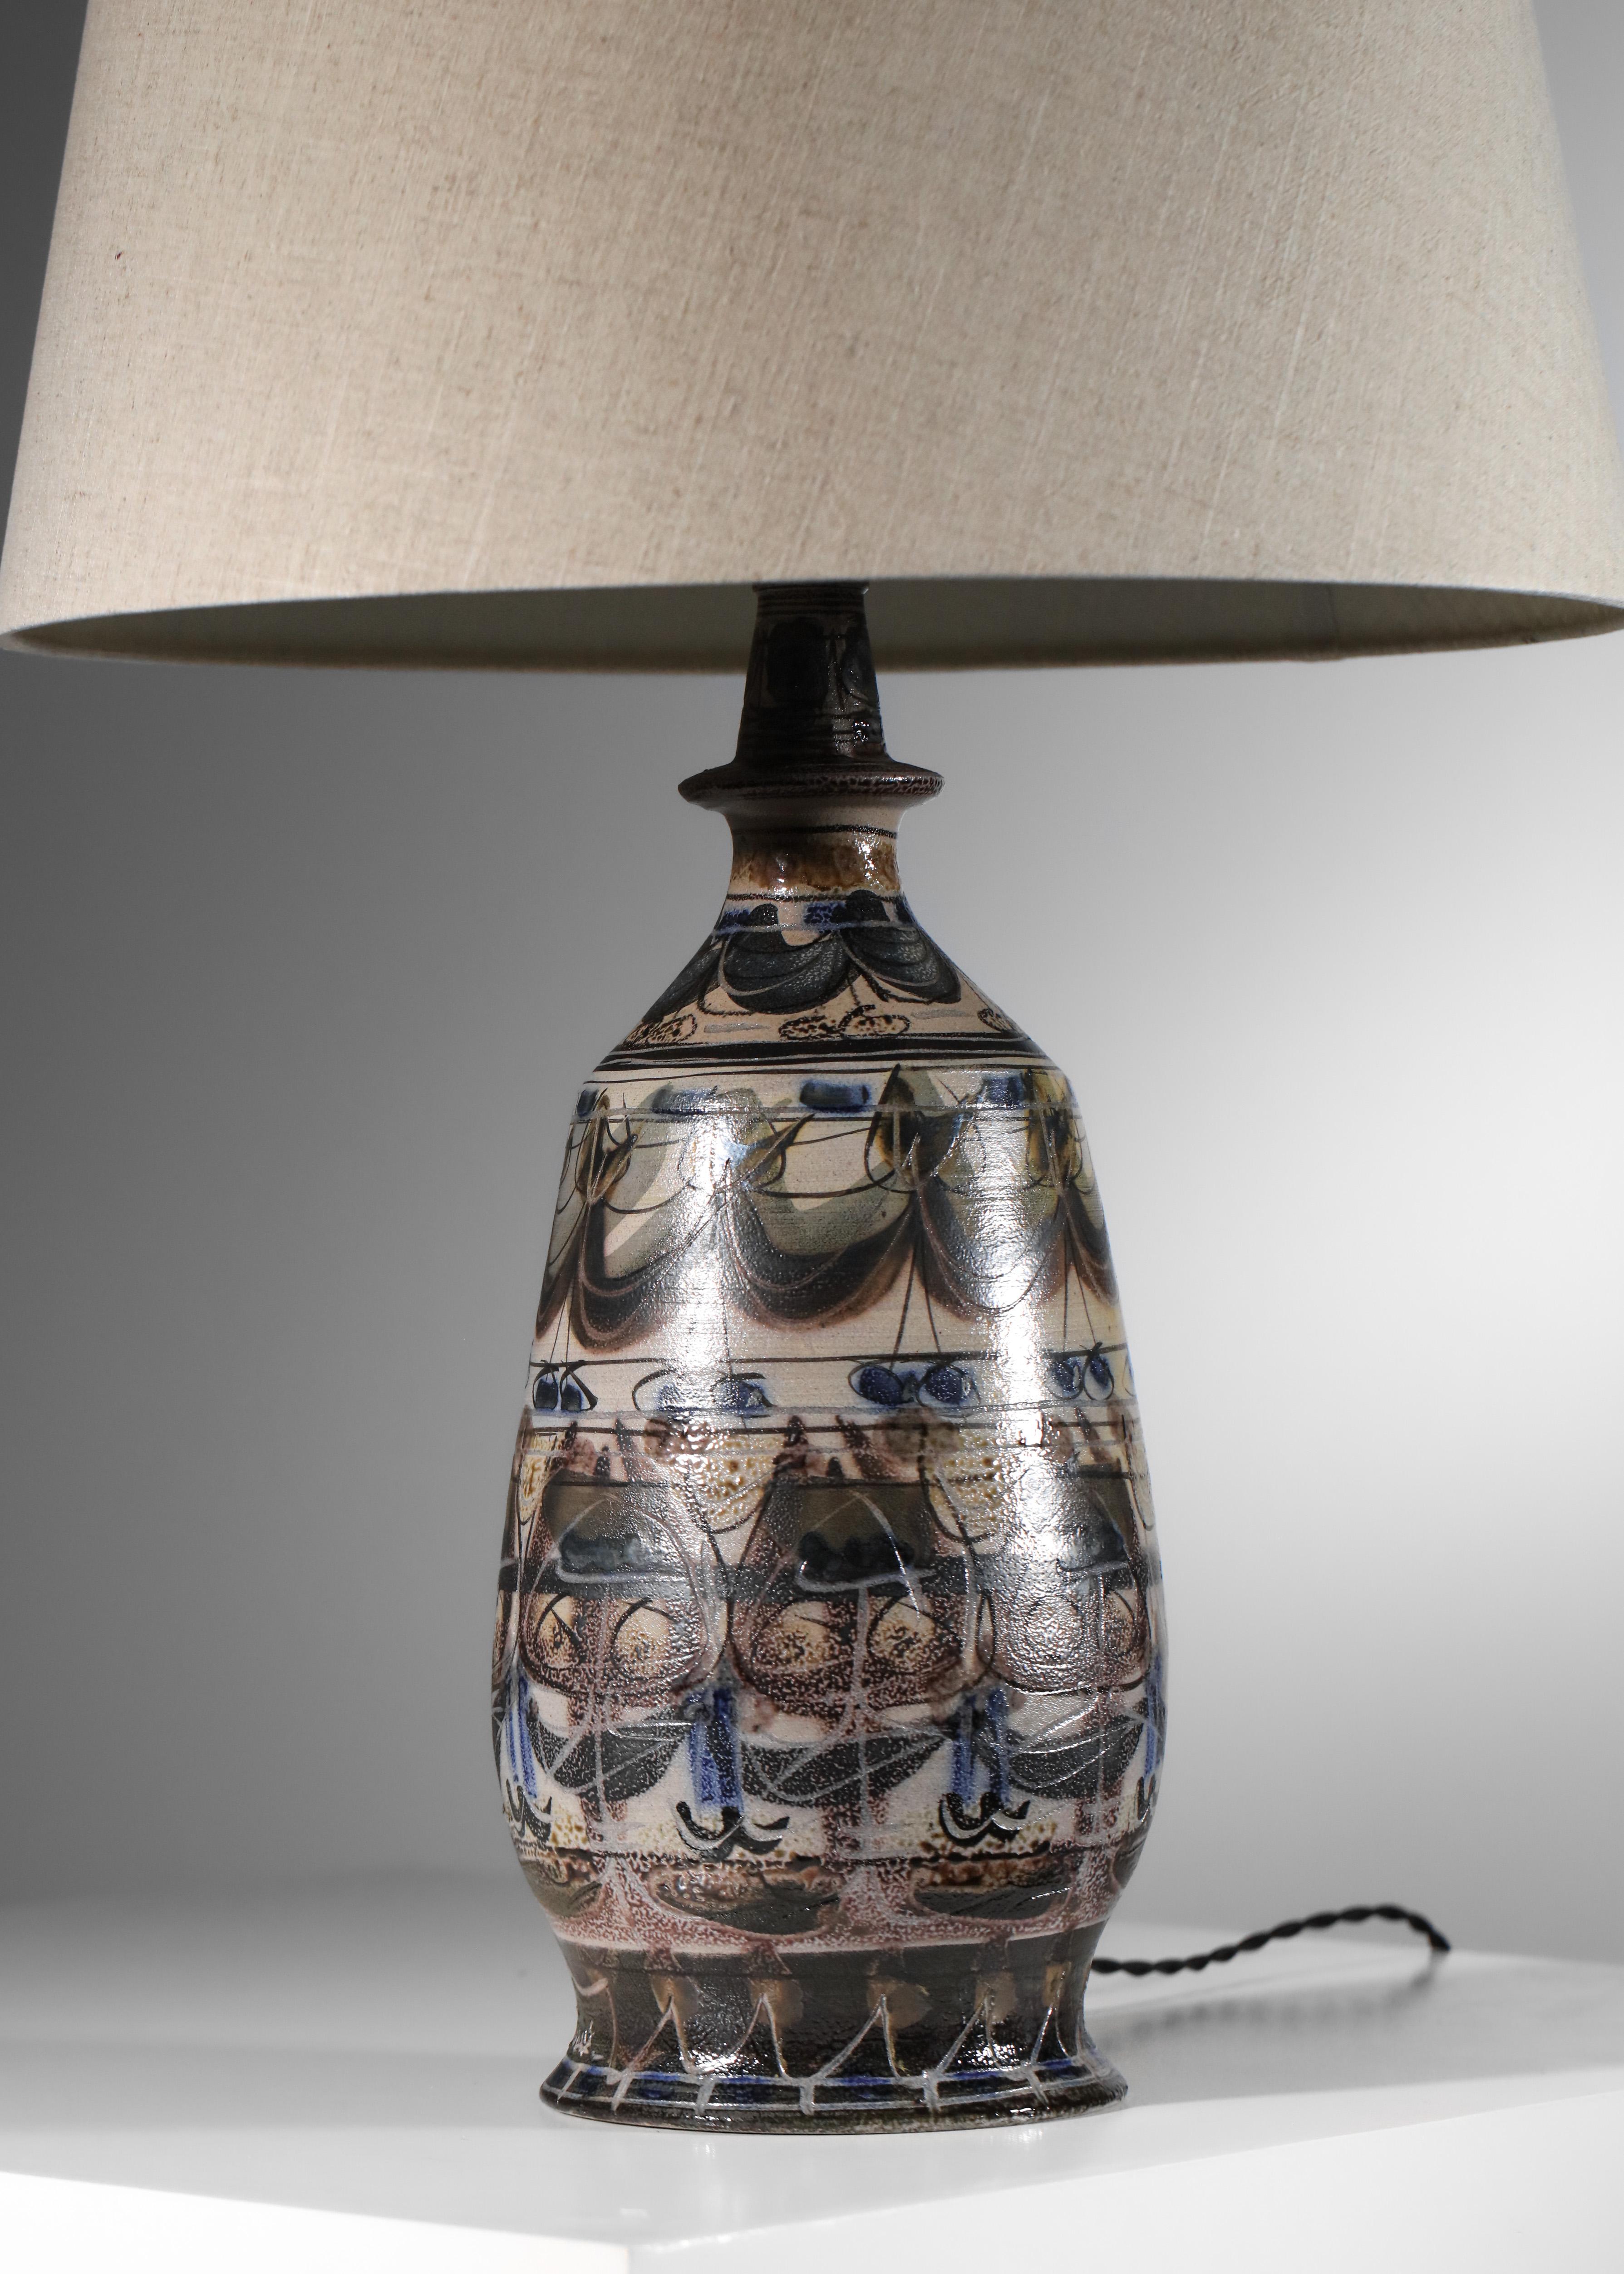 Large 60's table lamp base by French artist Lucas Antoine from the Keraluc factory in Brittany. Ceramic lamp base entirely covered with plant-inspired motifs. Very fine craftsmanship. Presence of the artist's signature on the lamp and the